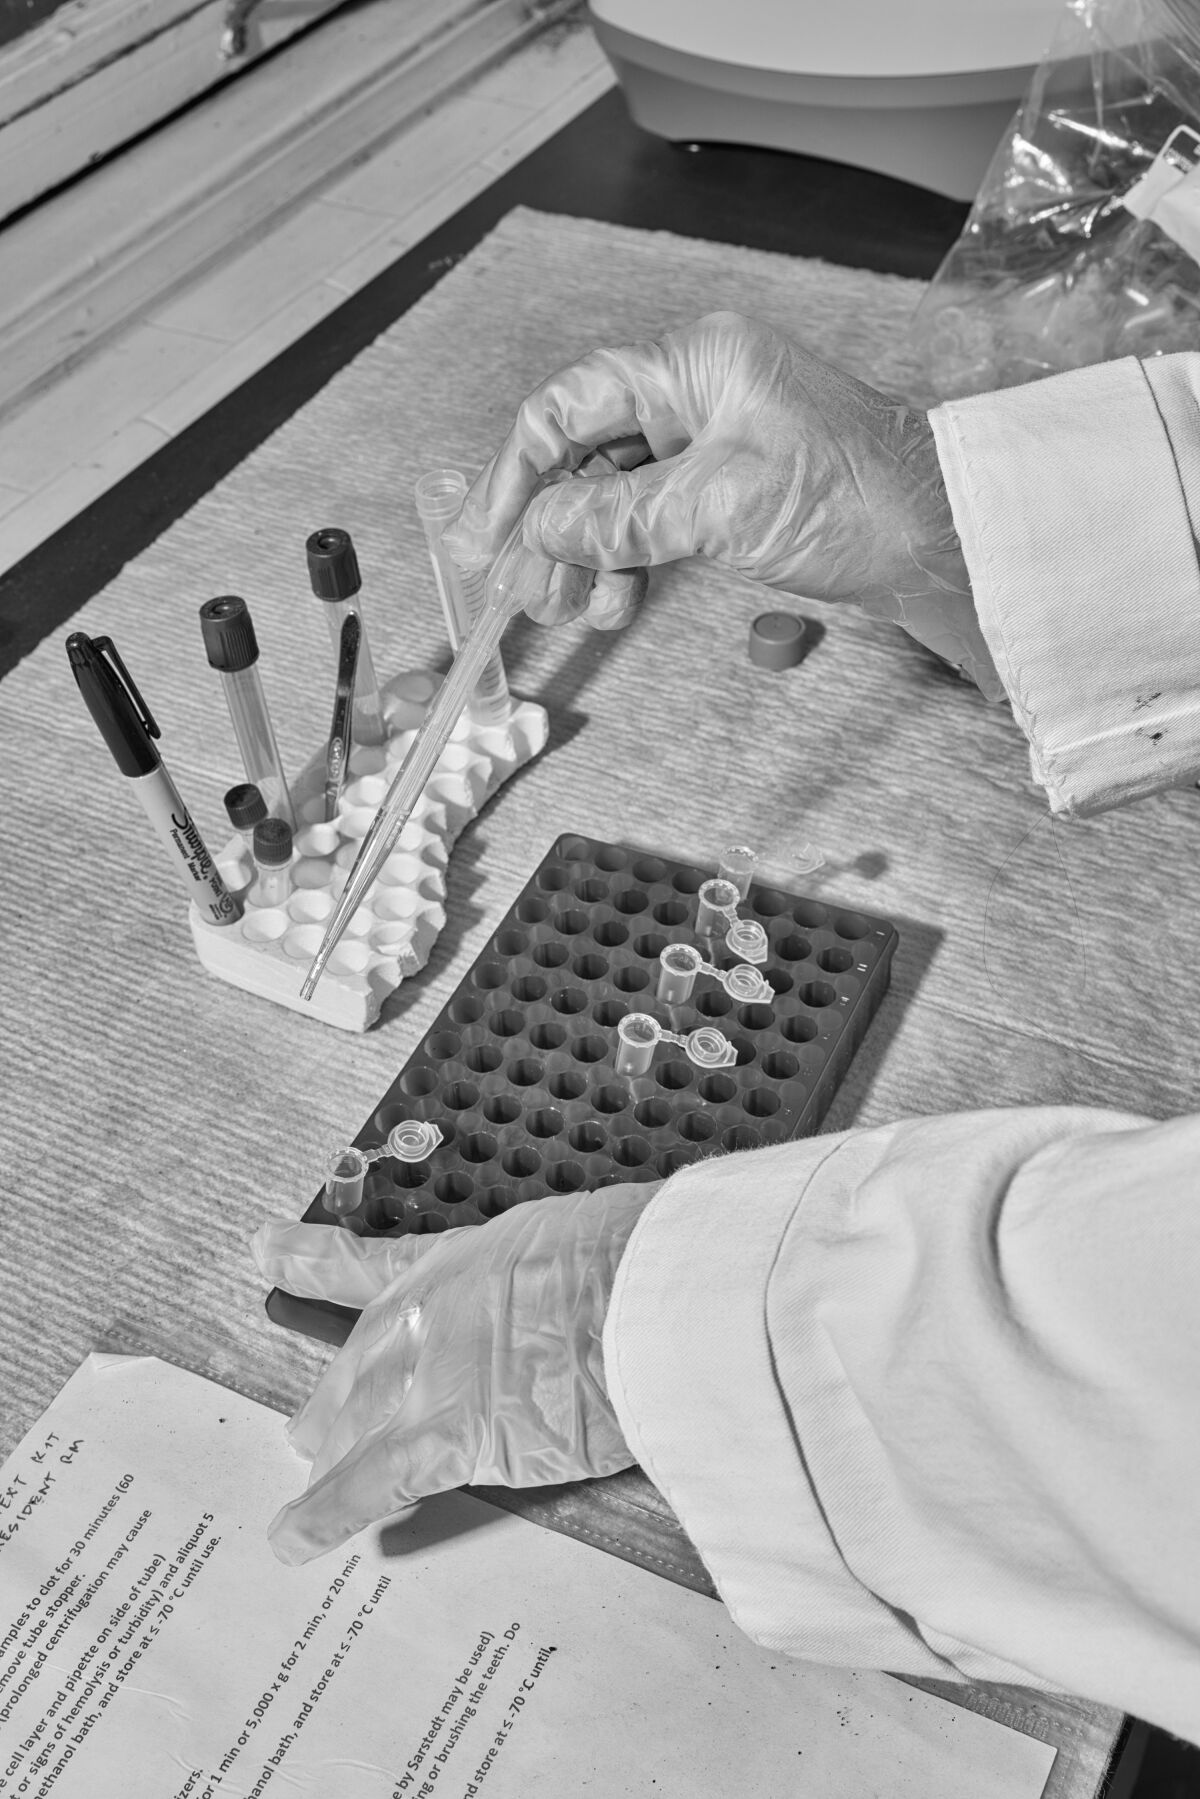 A researcher uses pipettes to transfer material into tubes for testing.